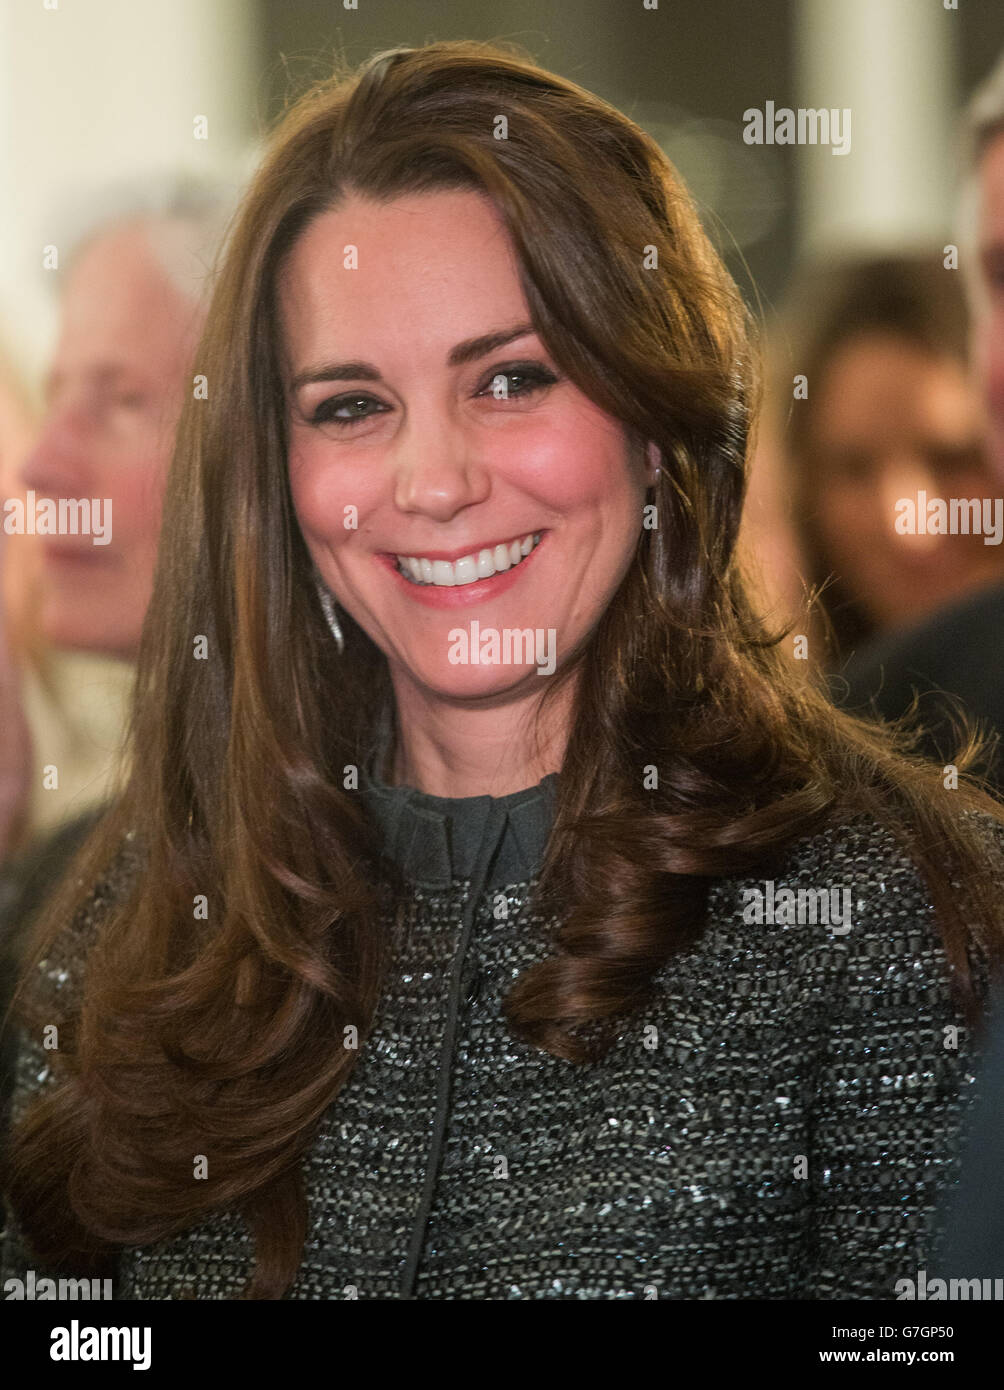 The Duchess of Cambridge during a reception co-hosted by the Royal Foundation and the Clinton Foundation at British Consul General's Residence in New York to recognise the work of the wildlife conservation charity Tusk Trust, of which the Duke of Cambridge is patron, and the organisations who are partners in United For Wildlife, while the Clinton Foundation is working with other groups to tackle wildlife trafficking. Stock Photo